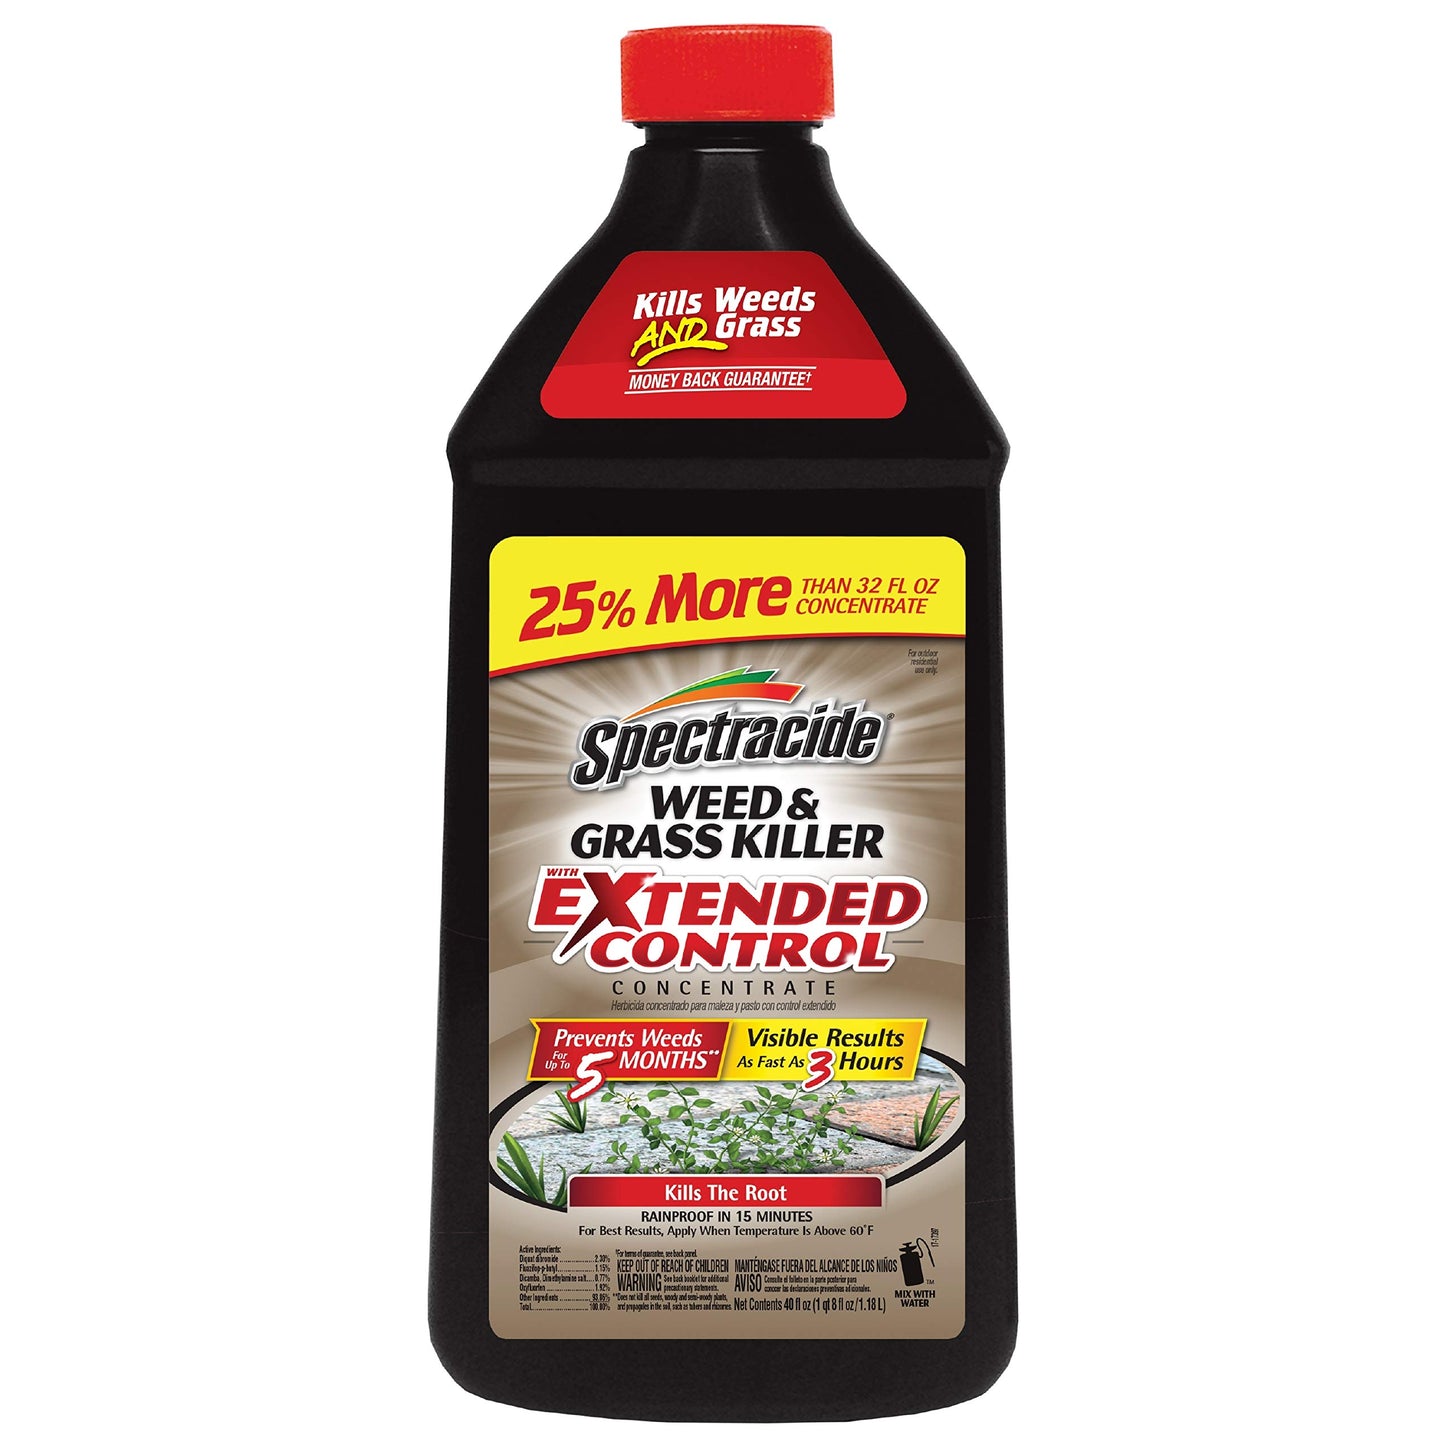 Spectracide Weed & Grass Killer With Extended Control Concentrate, Extended Weed And Grass Control, Prevents Weeds Coming Back, 40 fl Ounce